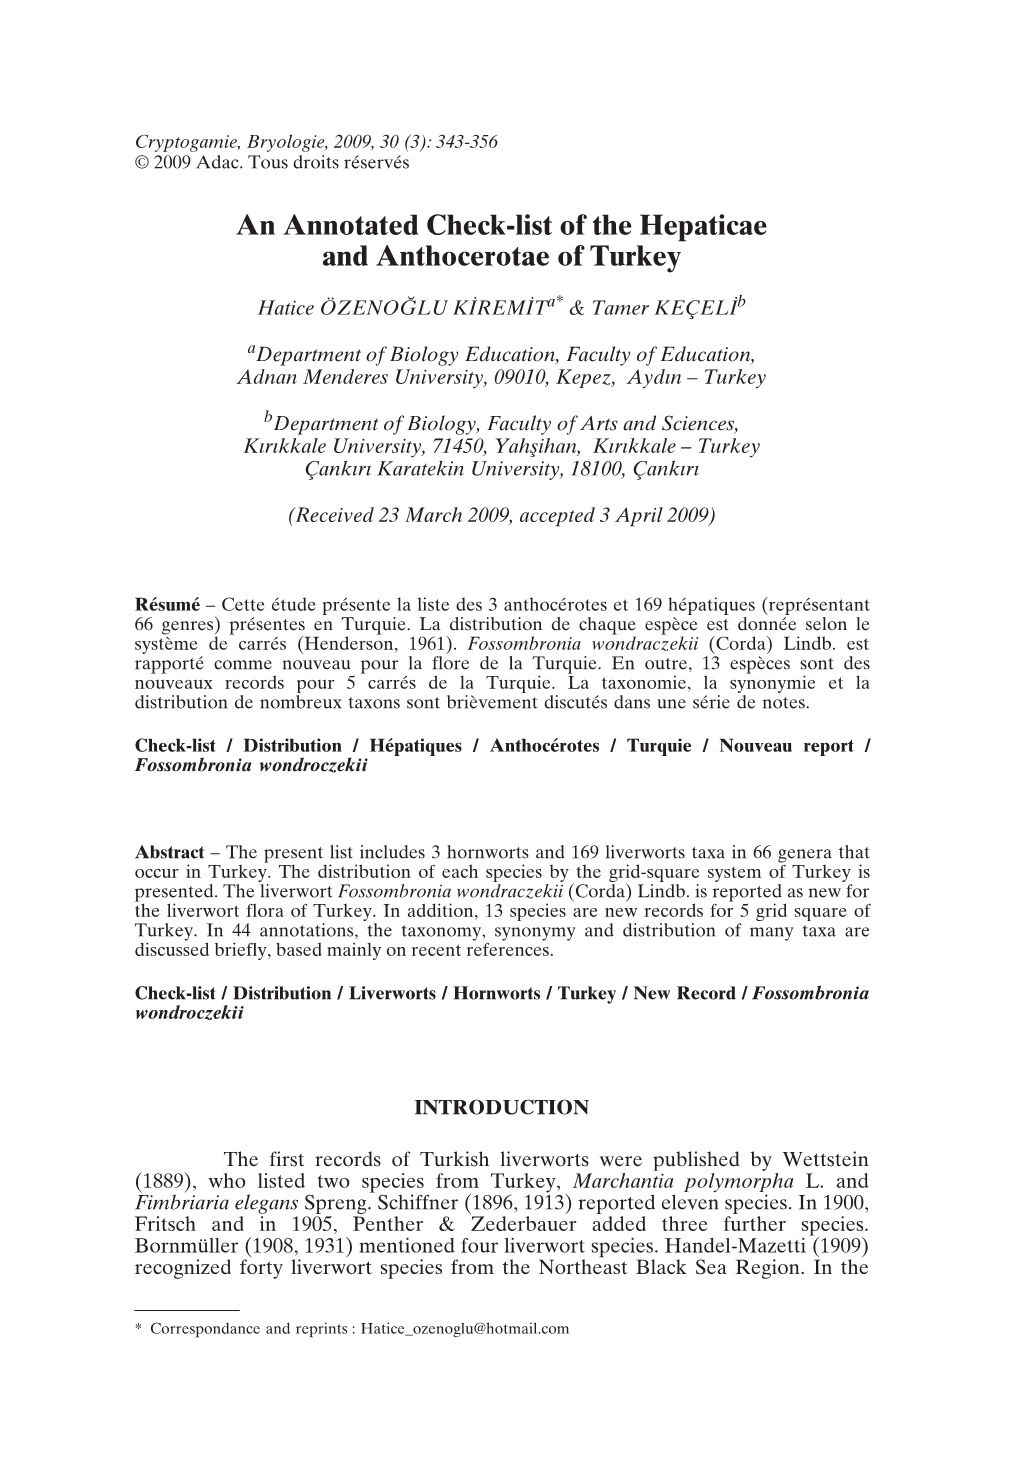 An Annotated Check-List of the Hepaticae and Anthocerotae of Turkey